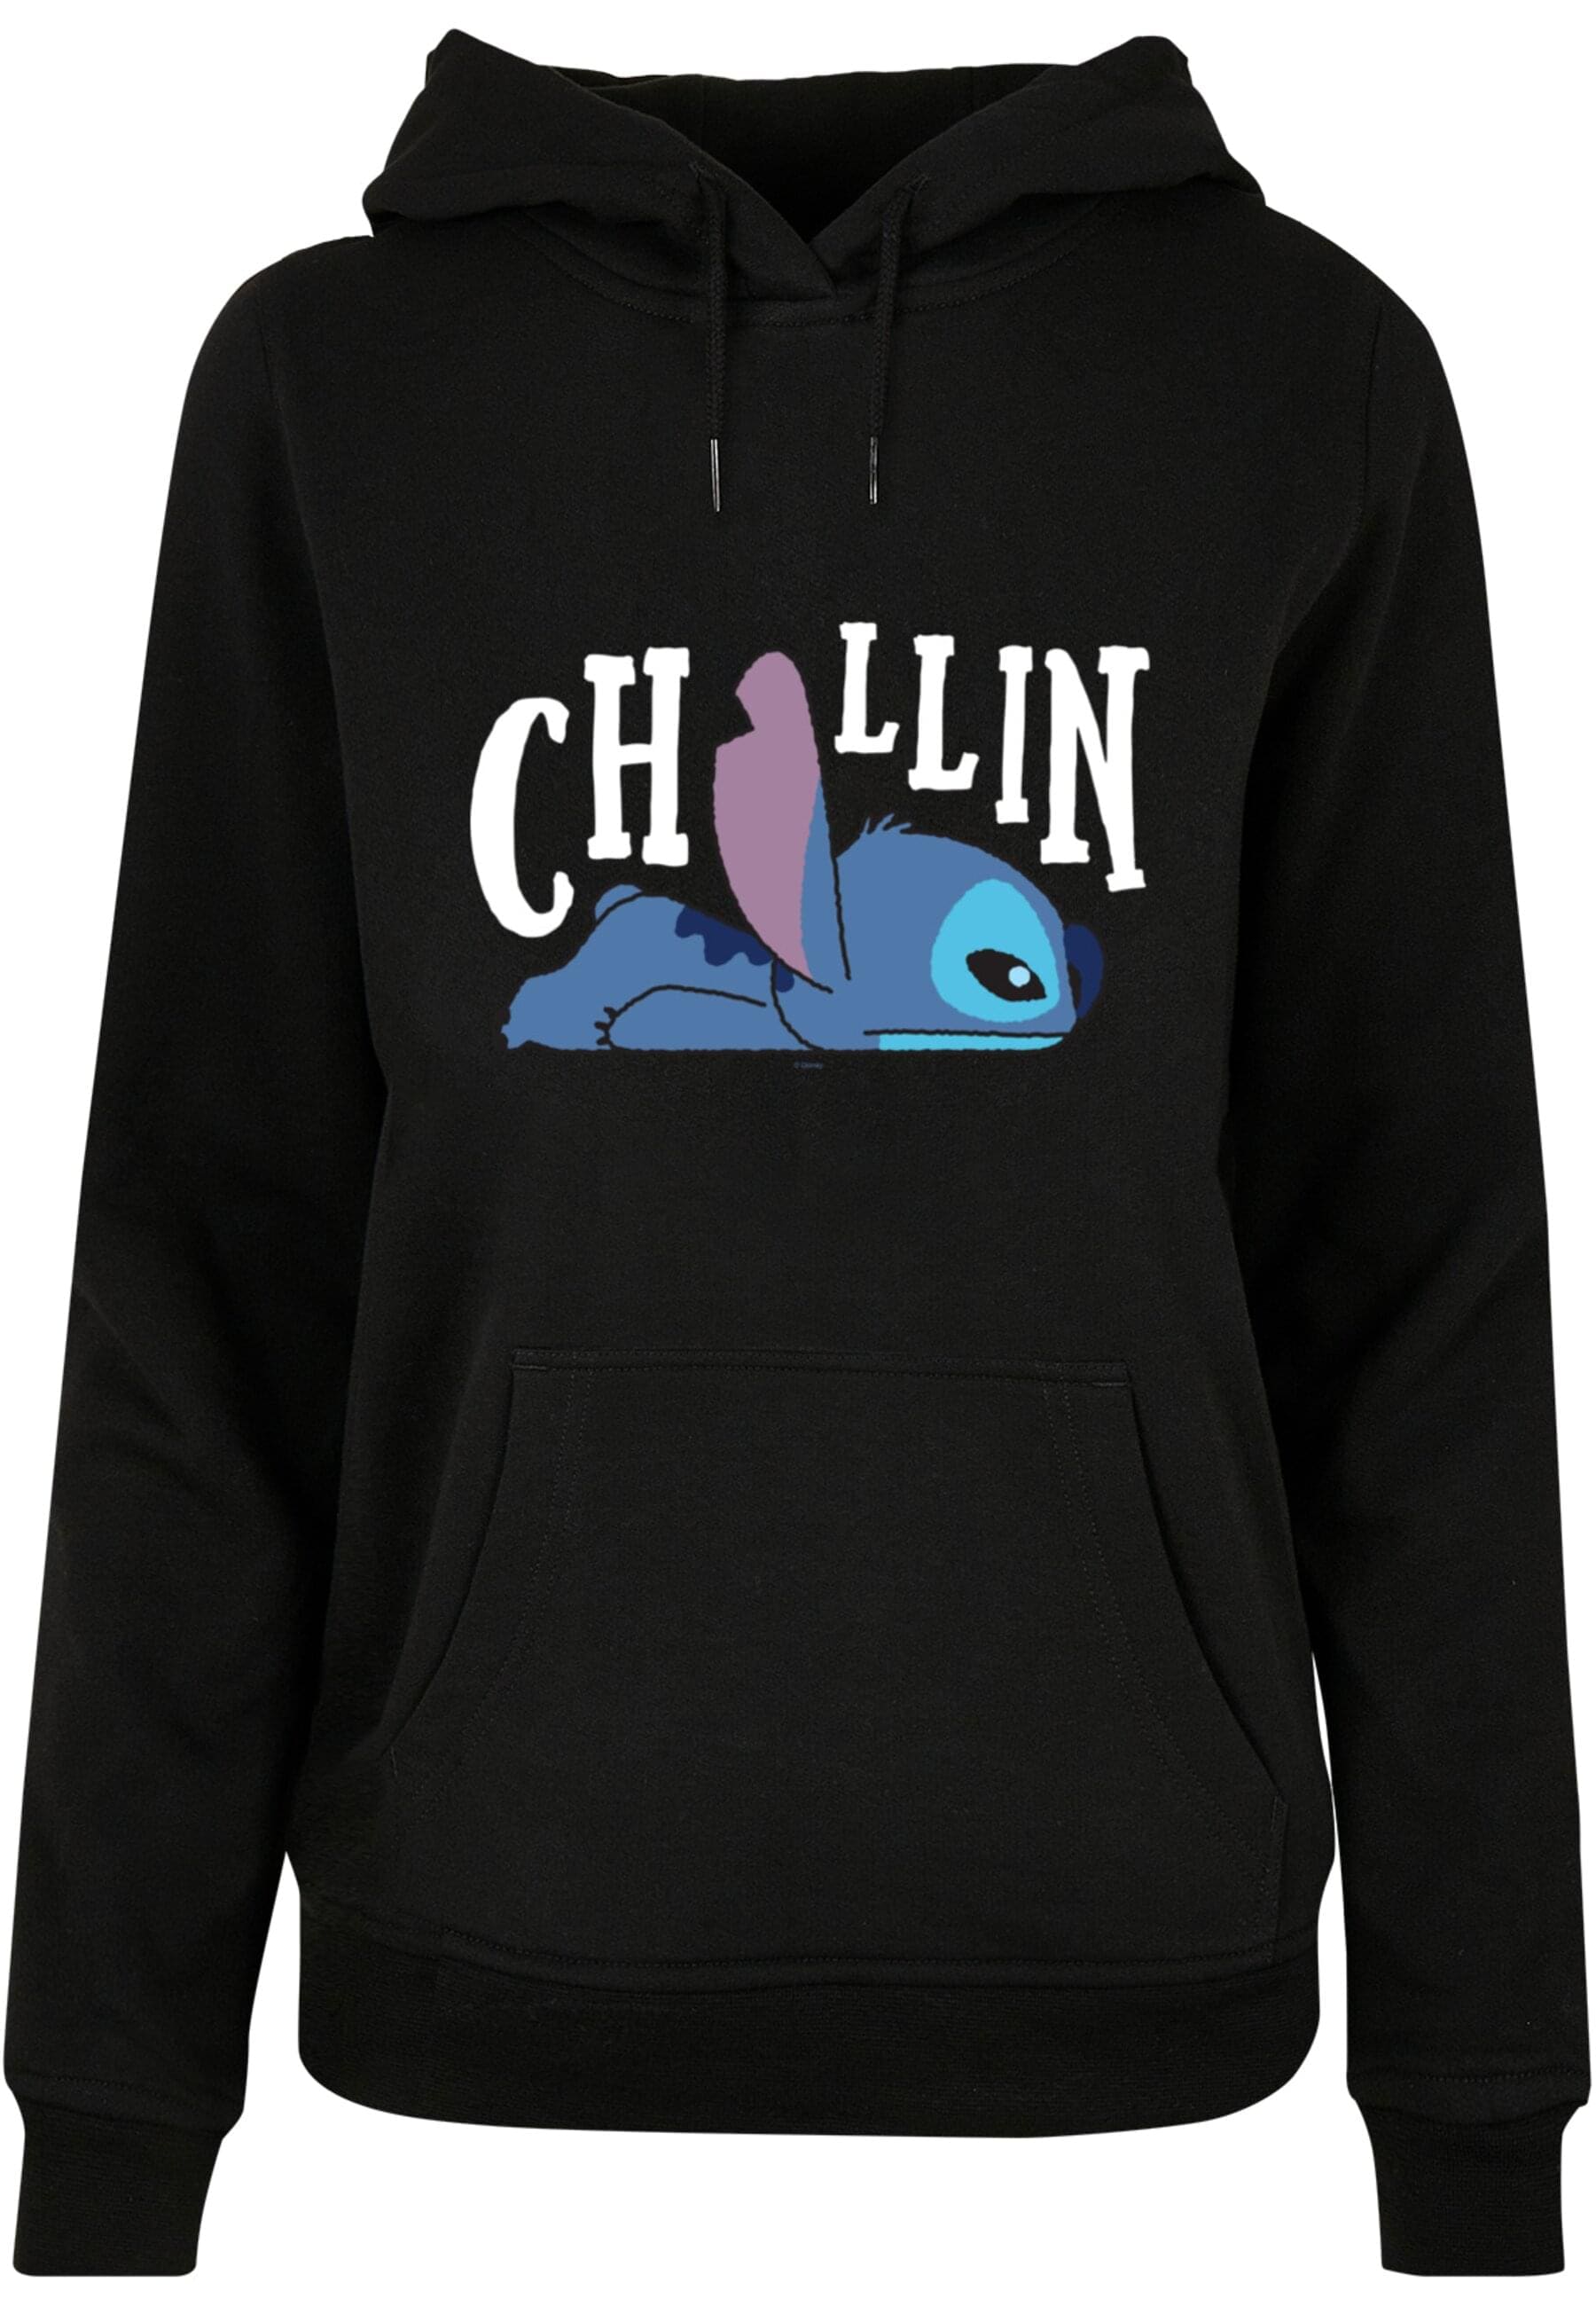 ABSOLUTE CULT Kapuzenpullover »ABSOLUTE CULT Damen Ladies Lilo And Stitch - Chillin Hoody«, (1 tlg.)